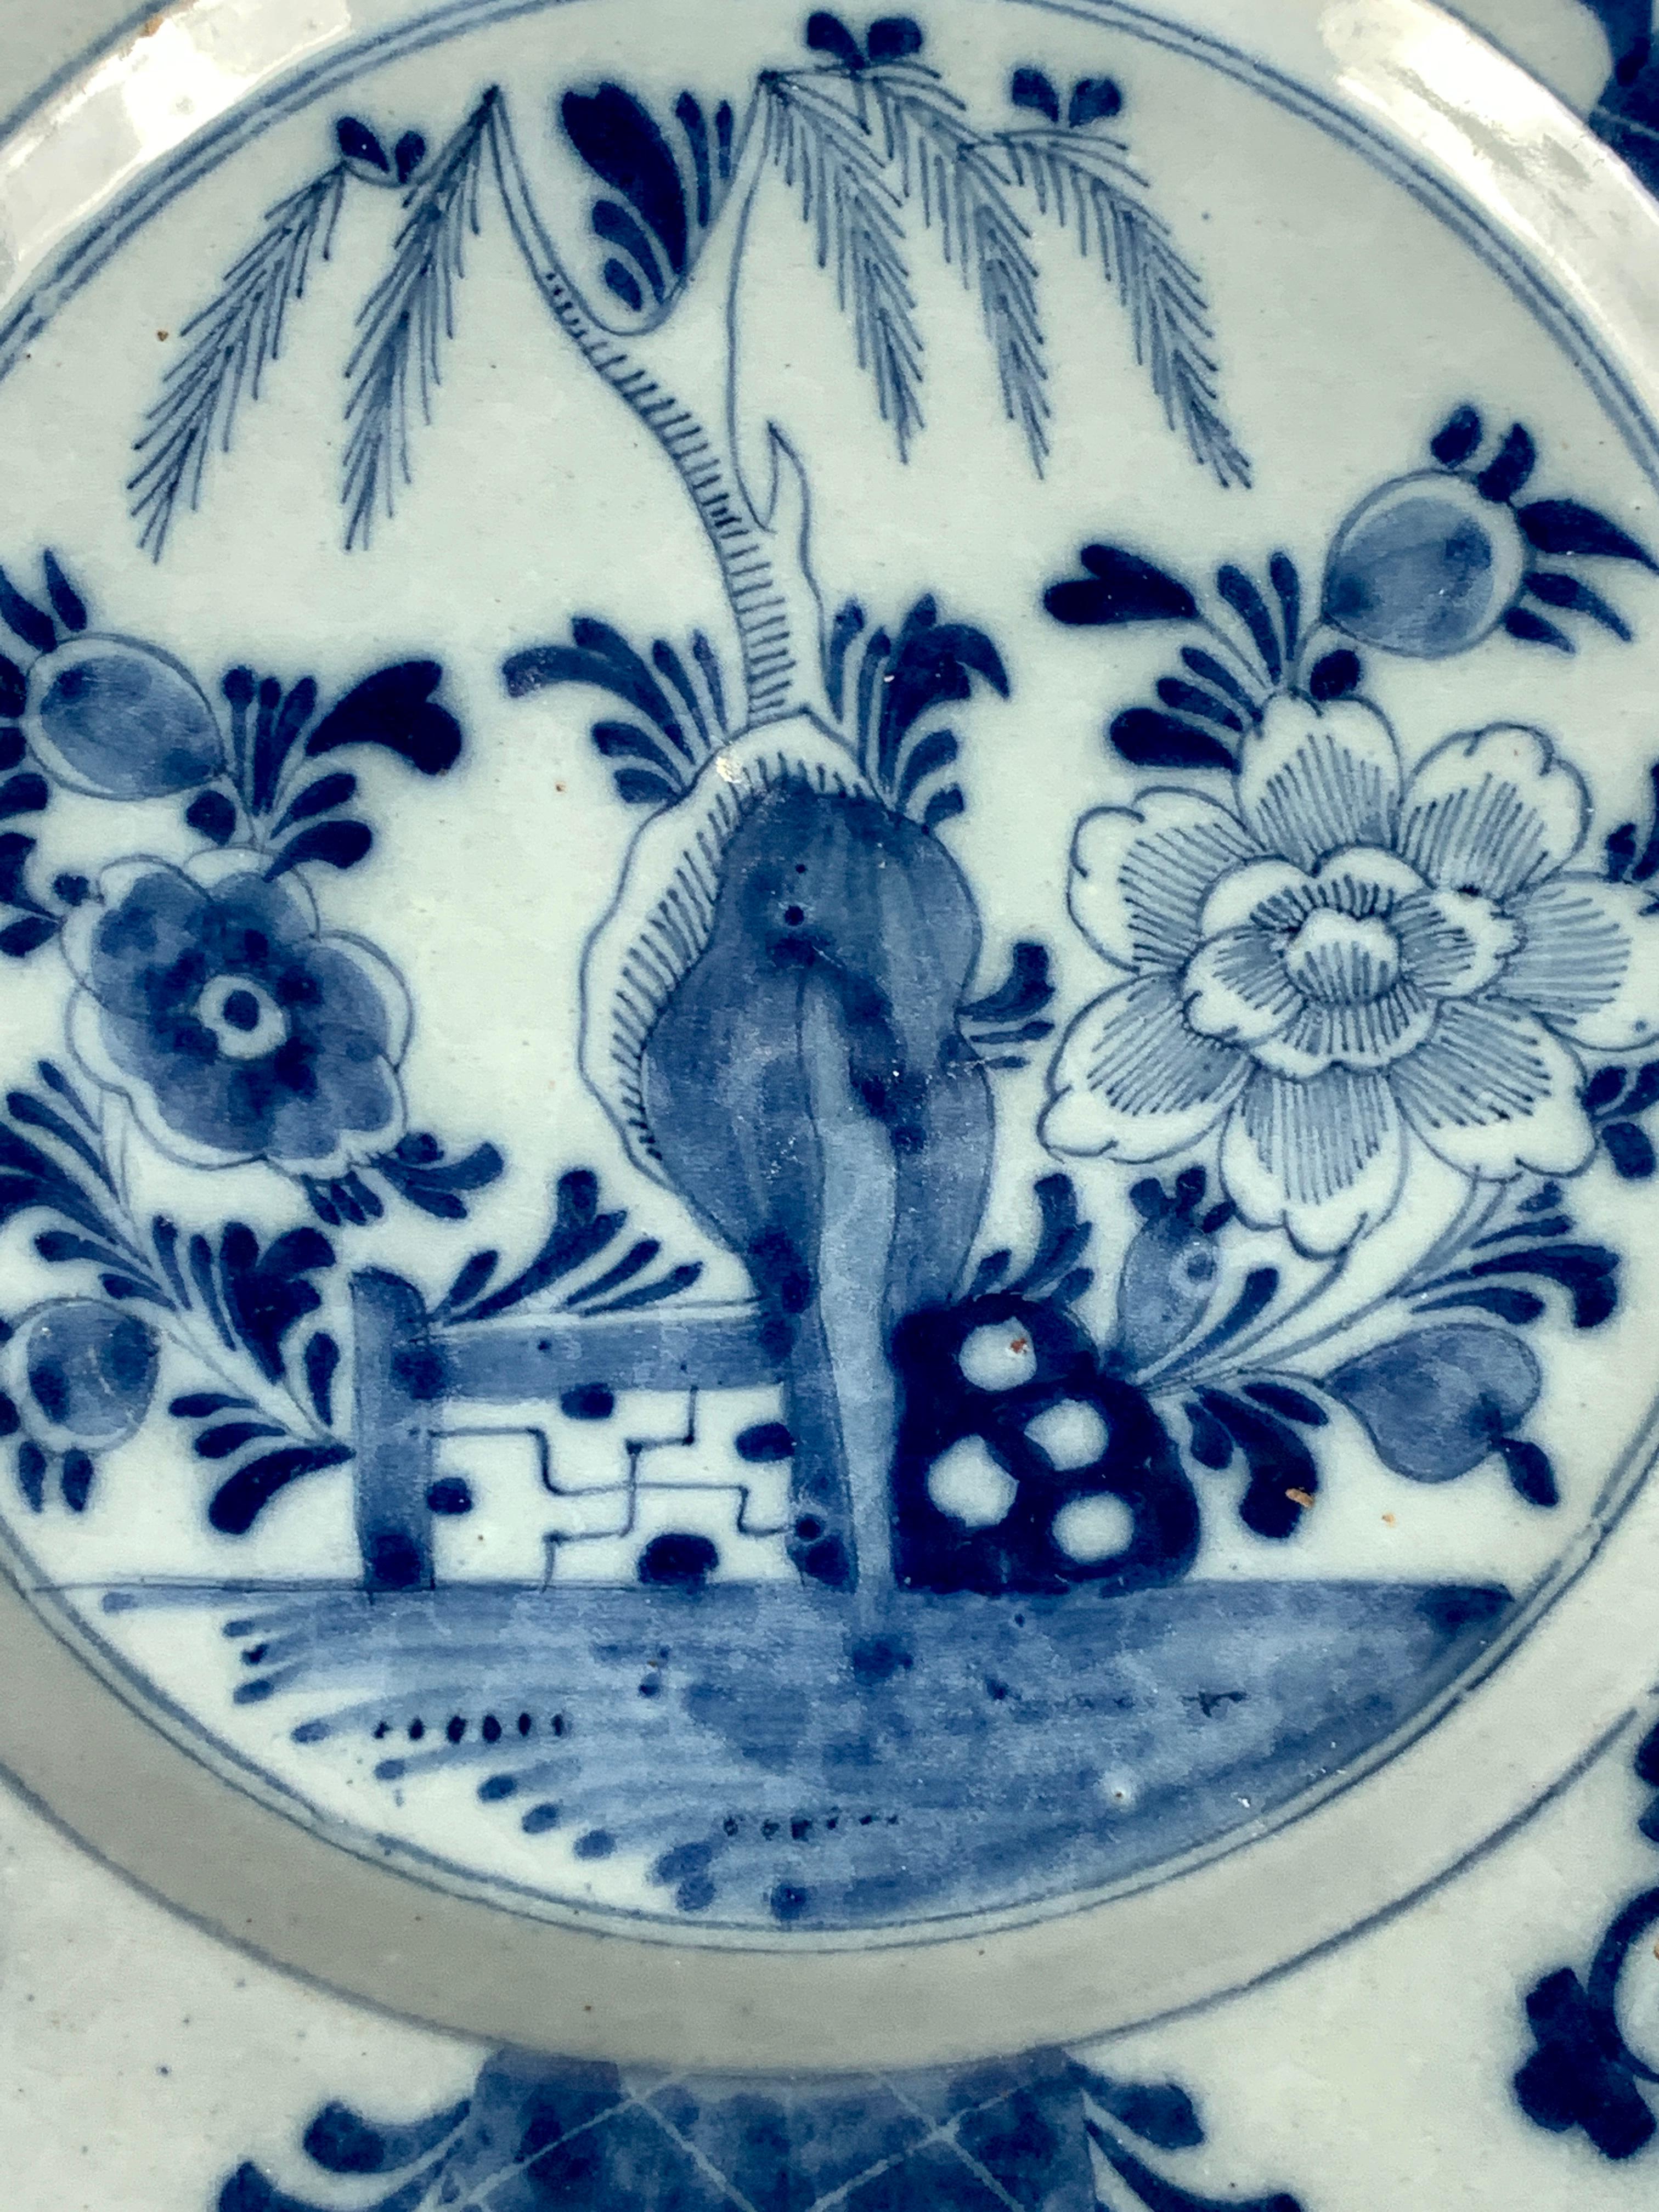 This pair of antique blue and white Dutch Delft hand-painted dishes were made circa 1770.
They feature a garden scene showing oversized flowers and a border with flowering vines and a crisscross design on a blue ground.
Dimensions: 8.65